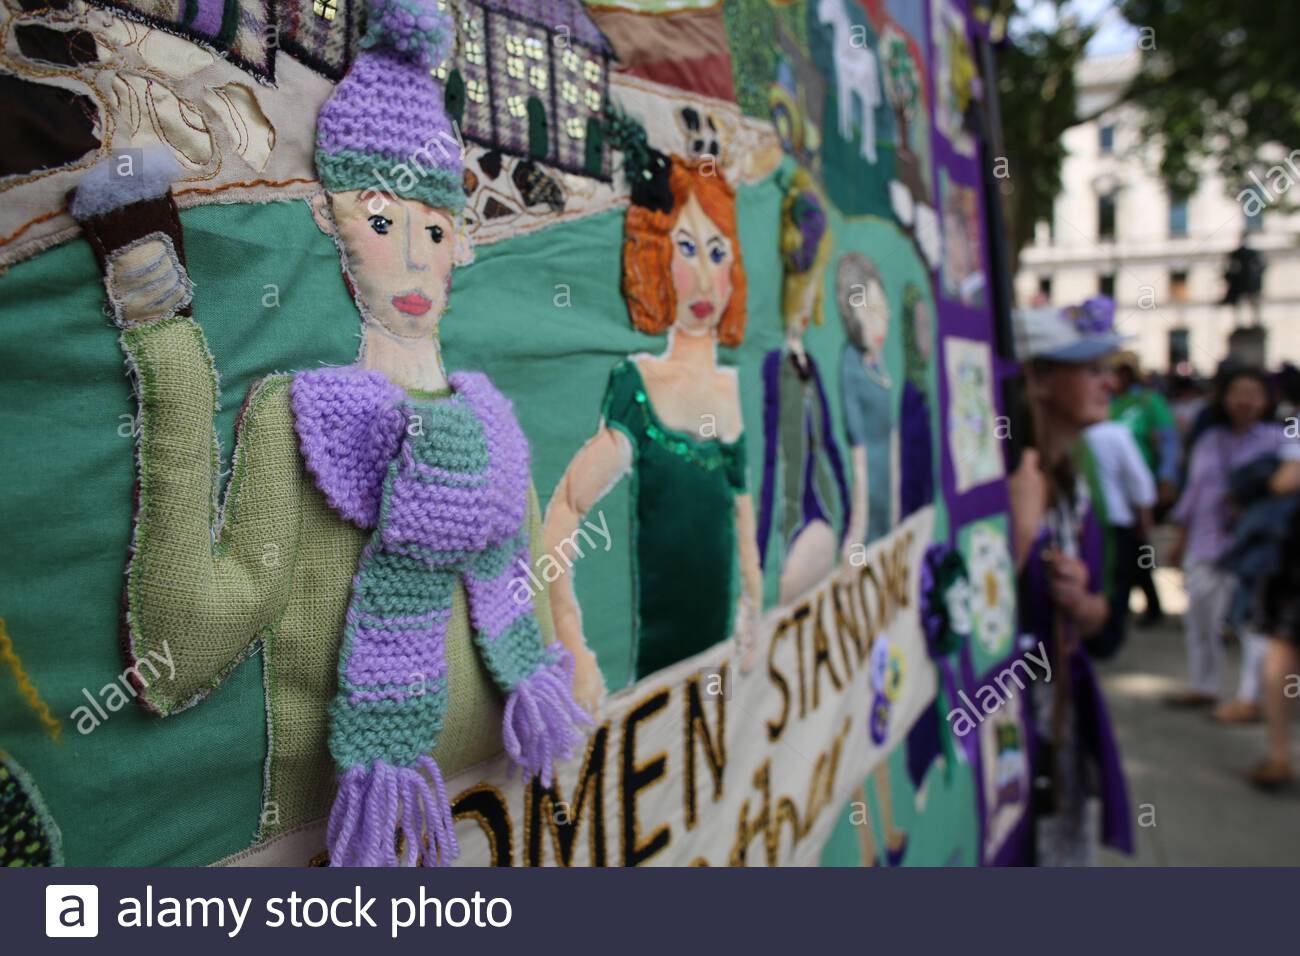 A banner with the words Women standing together at Wwestminster made by women who attended the 100 suffrage anniversary parade. Stock Photo